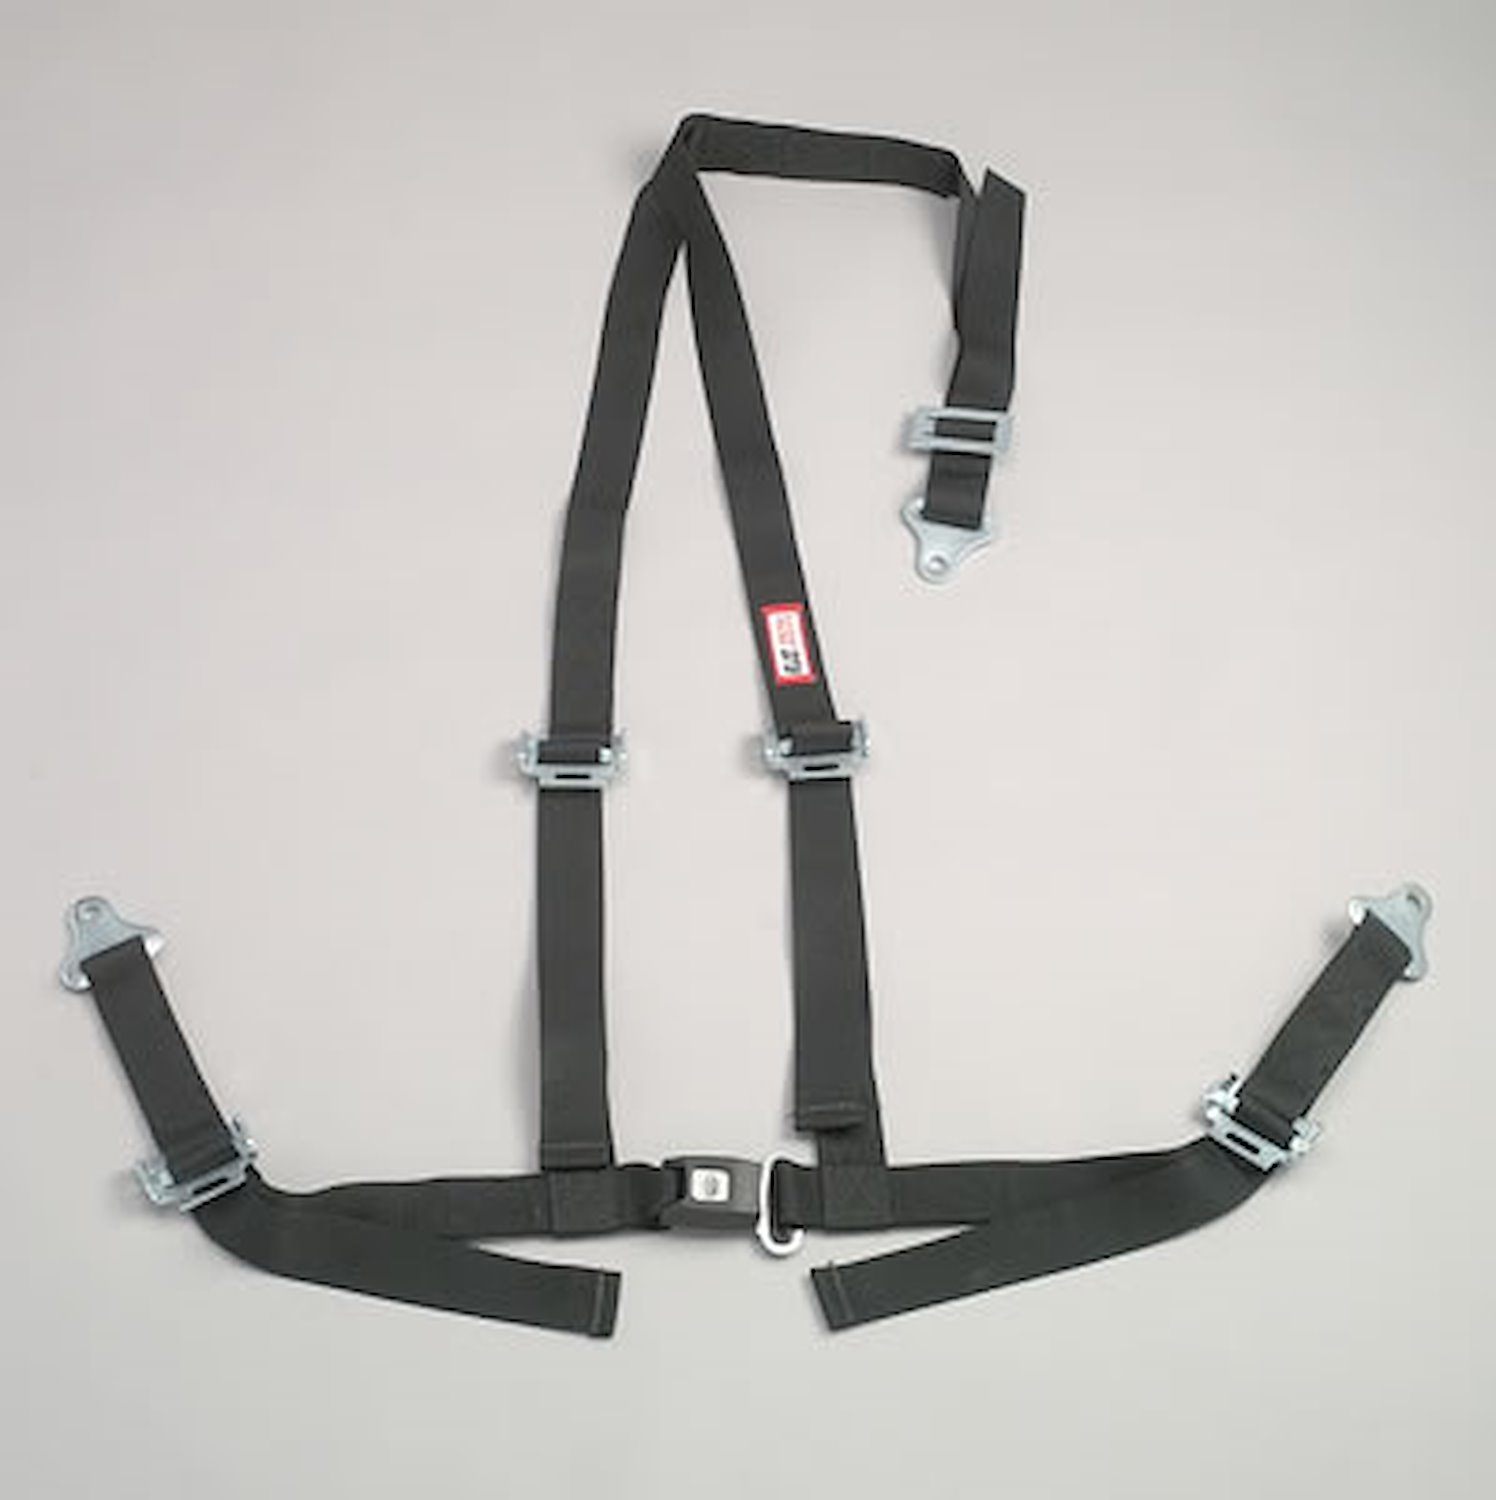 NON-SFI B&T HARNESS 2 PULL UP Lap Belt 2 S. H. Y FLOOR Mount ALL WRAP ENDS YELLOW